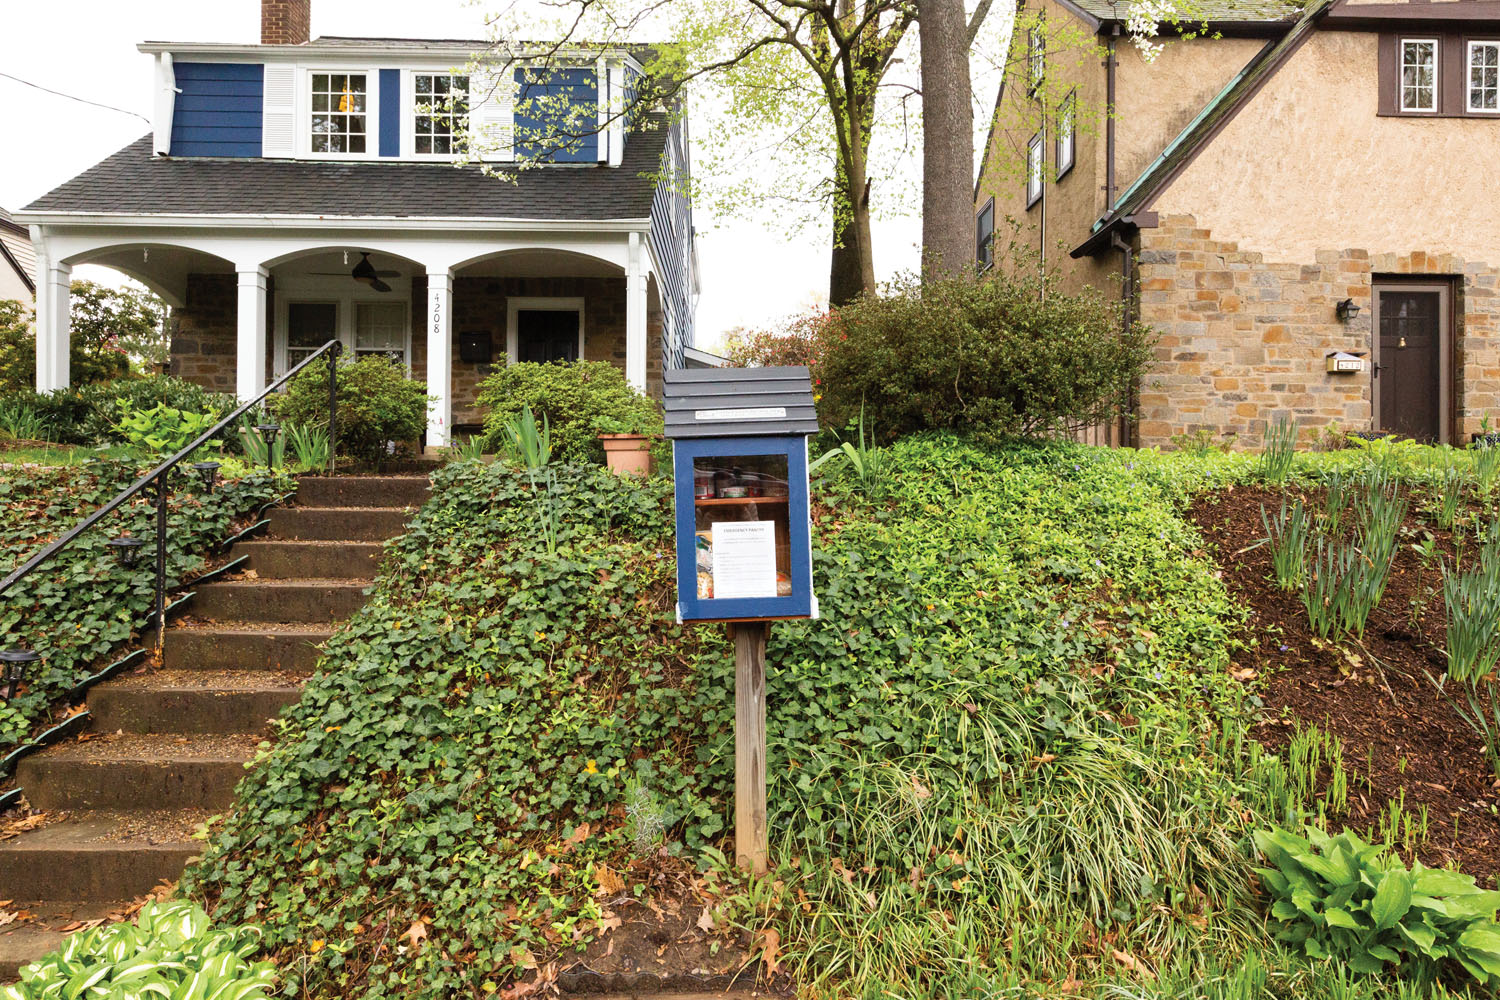 Little Free Library (repurposed as a food pantry), 46th St. NW. Photo by María Luz Bravo.